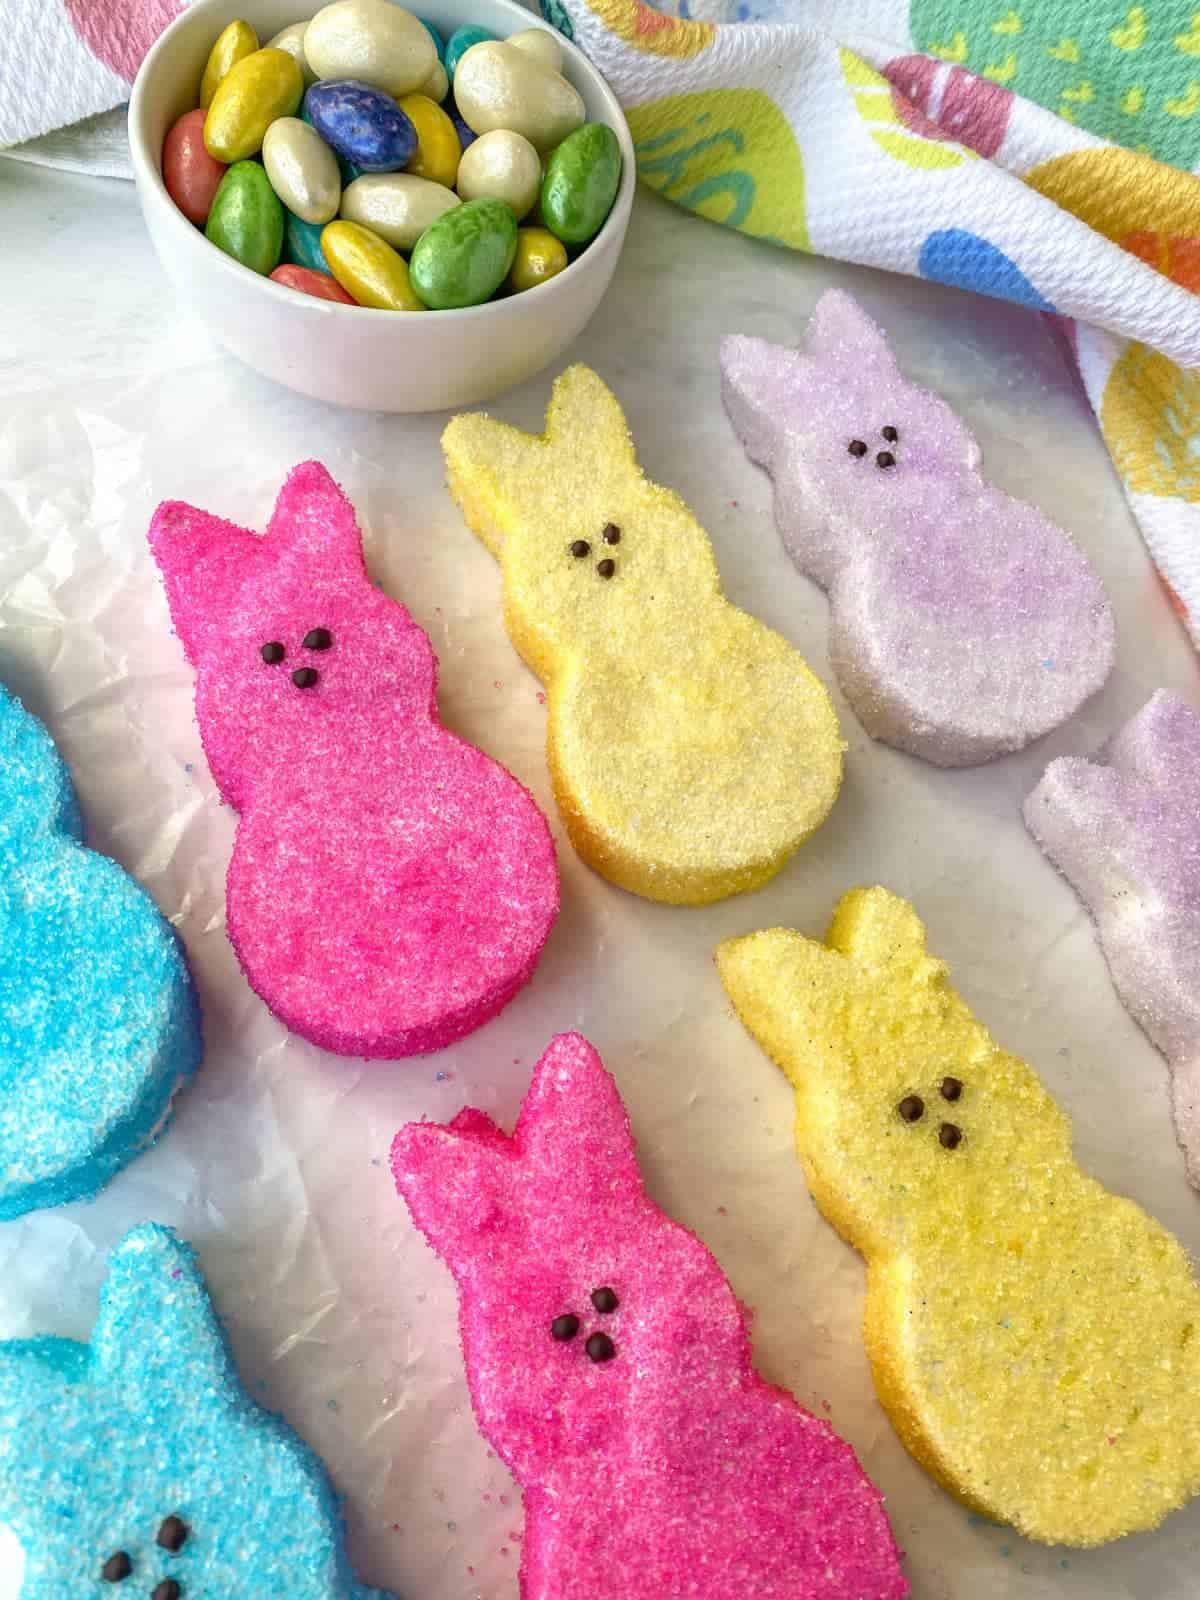 Blue, pink, yellow, and purple bunny-shaped Homemade Peeps.